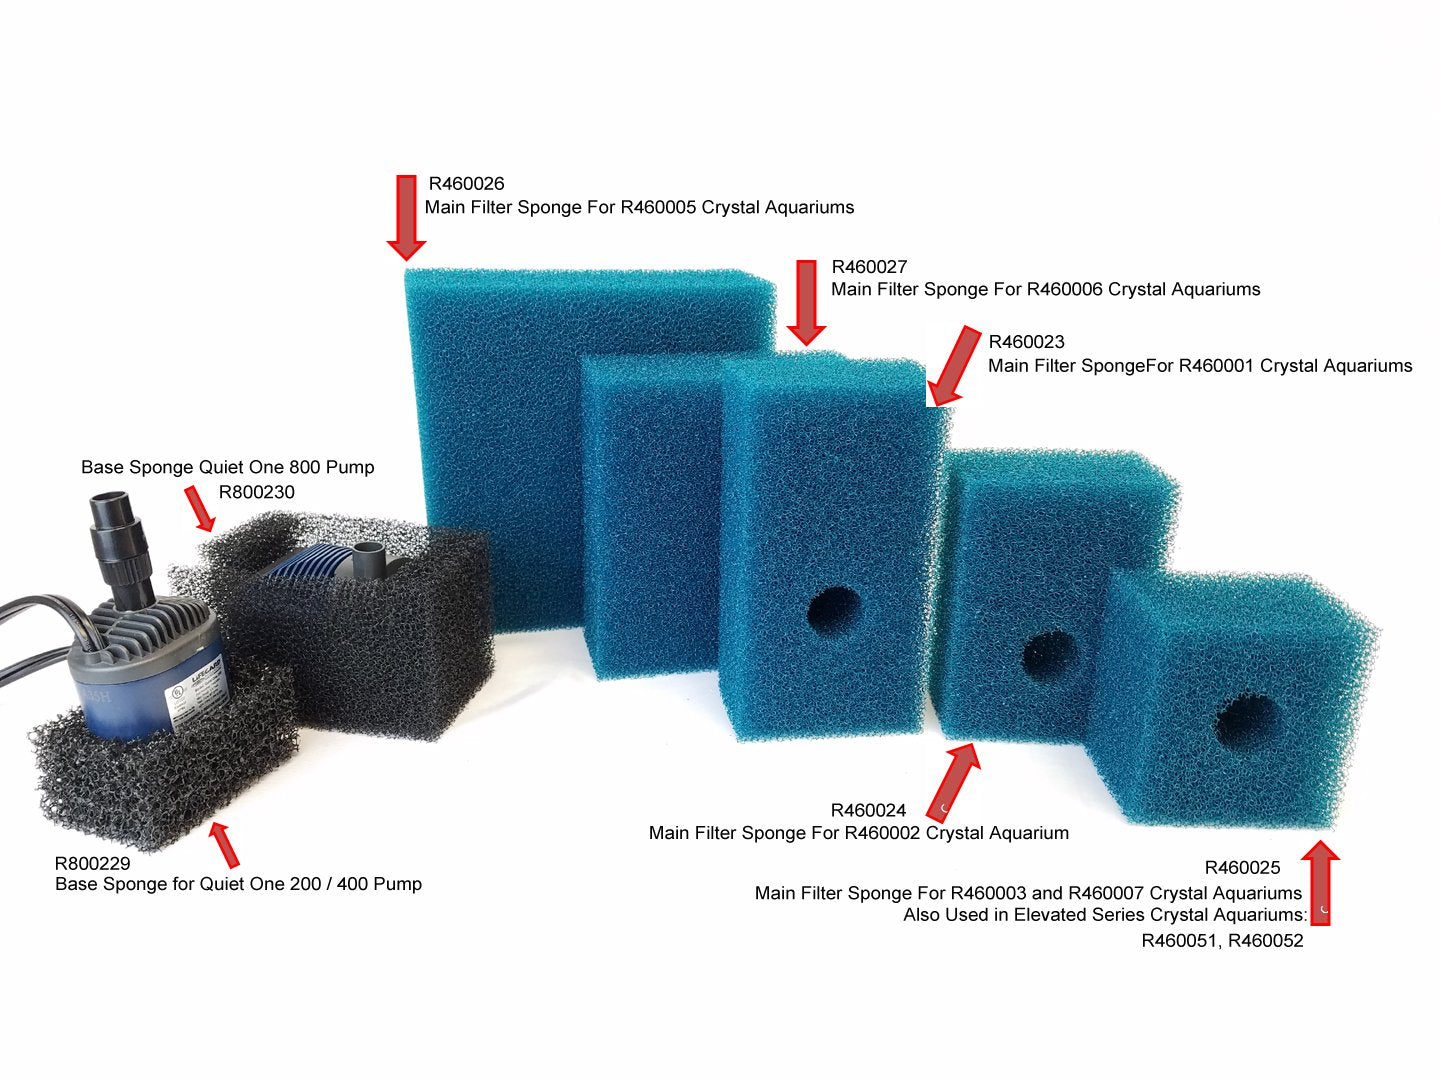 Mechanical Sponges for Crystal Aquarium with Built in Side Filter  (3.8 gallons)